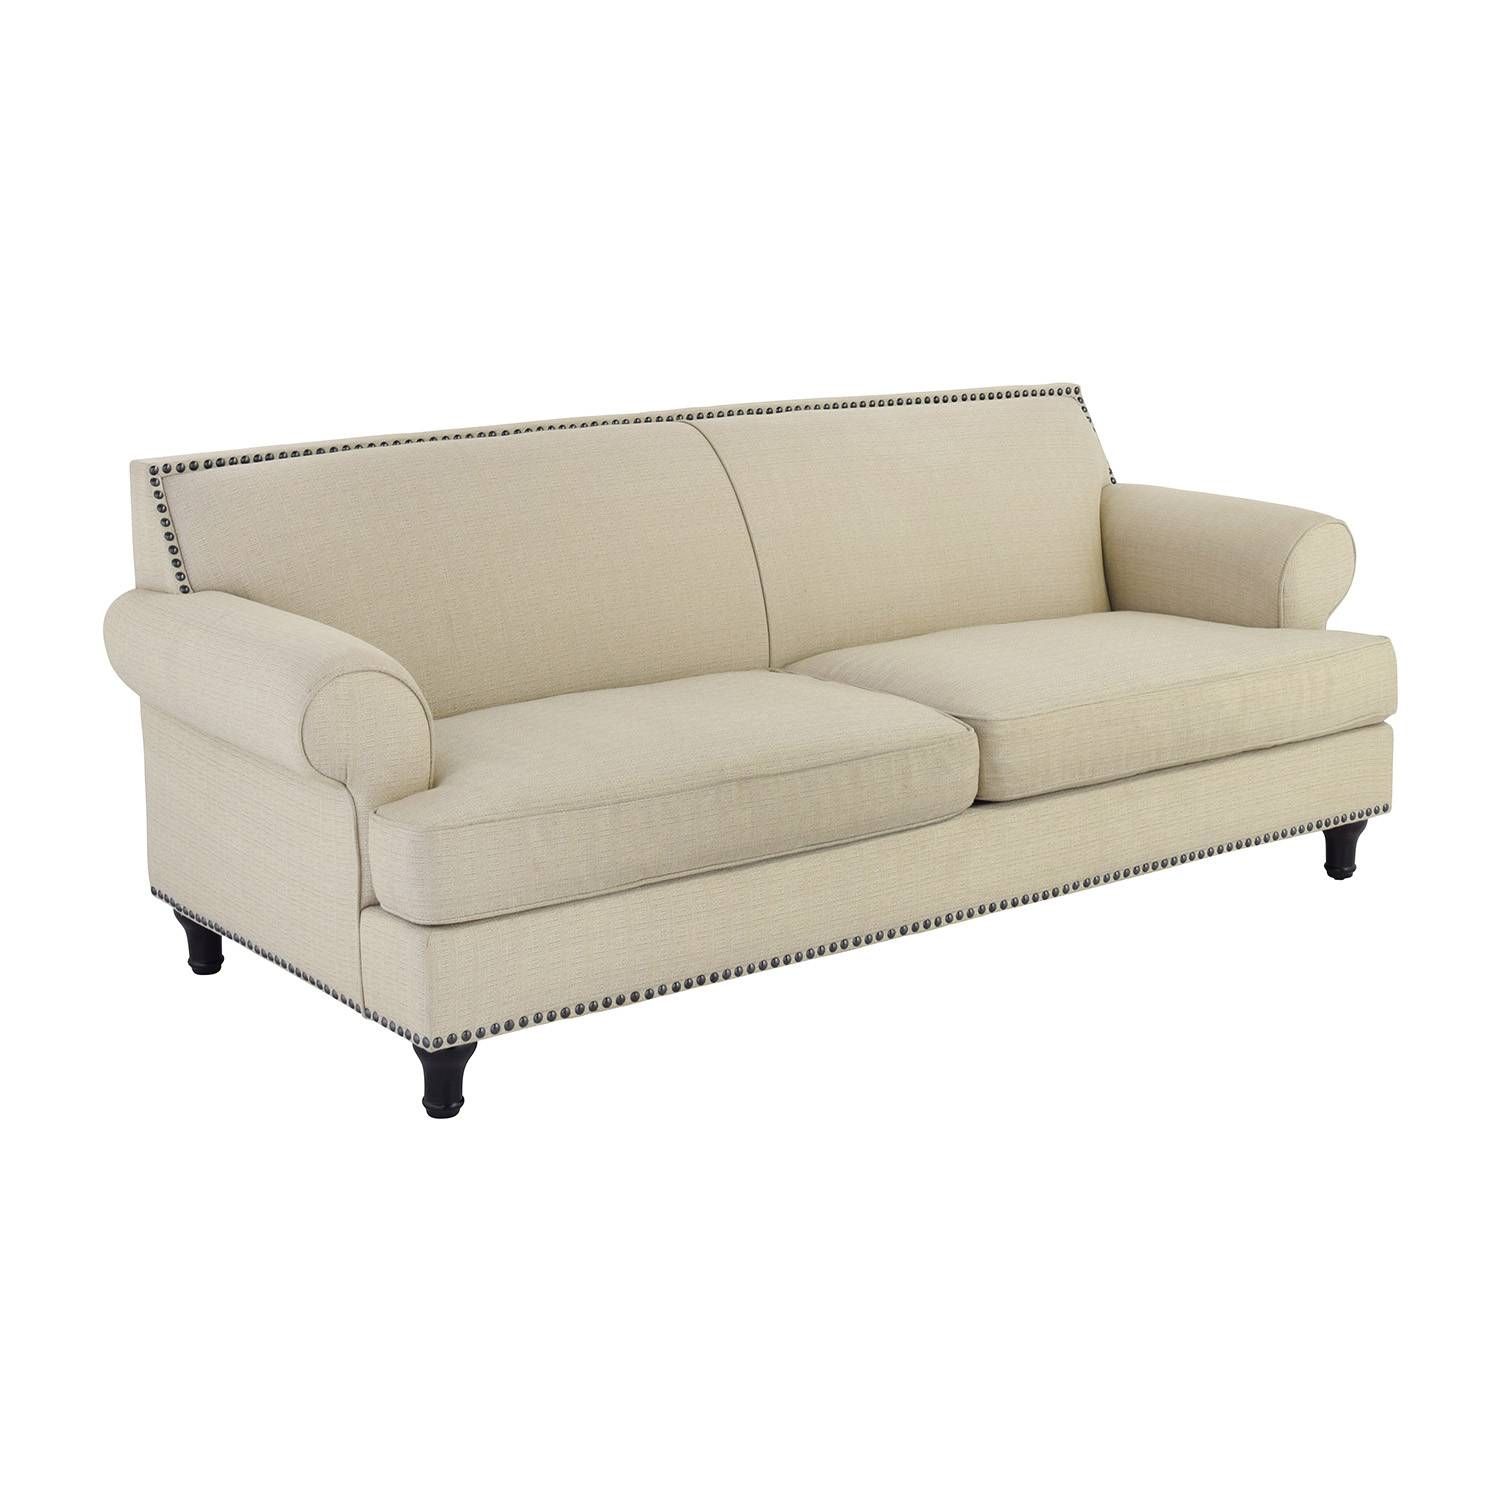 48% Off – Pier 1 Pier 1 Carmen Tan Couch With Studs / Sofas For Pier 1 Sofas (View 3 of 15)